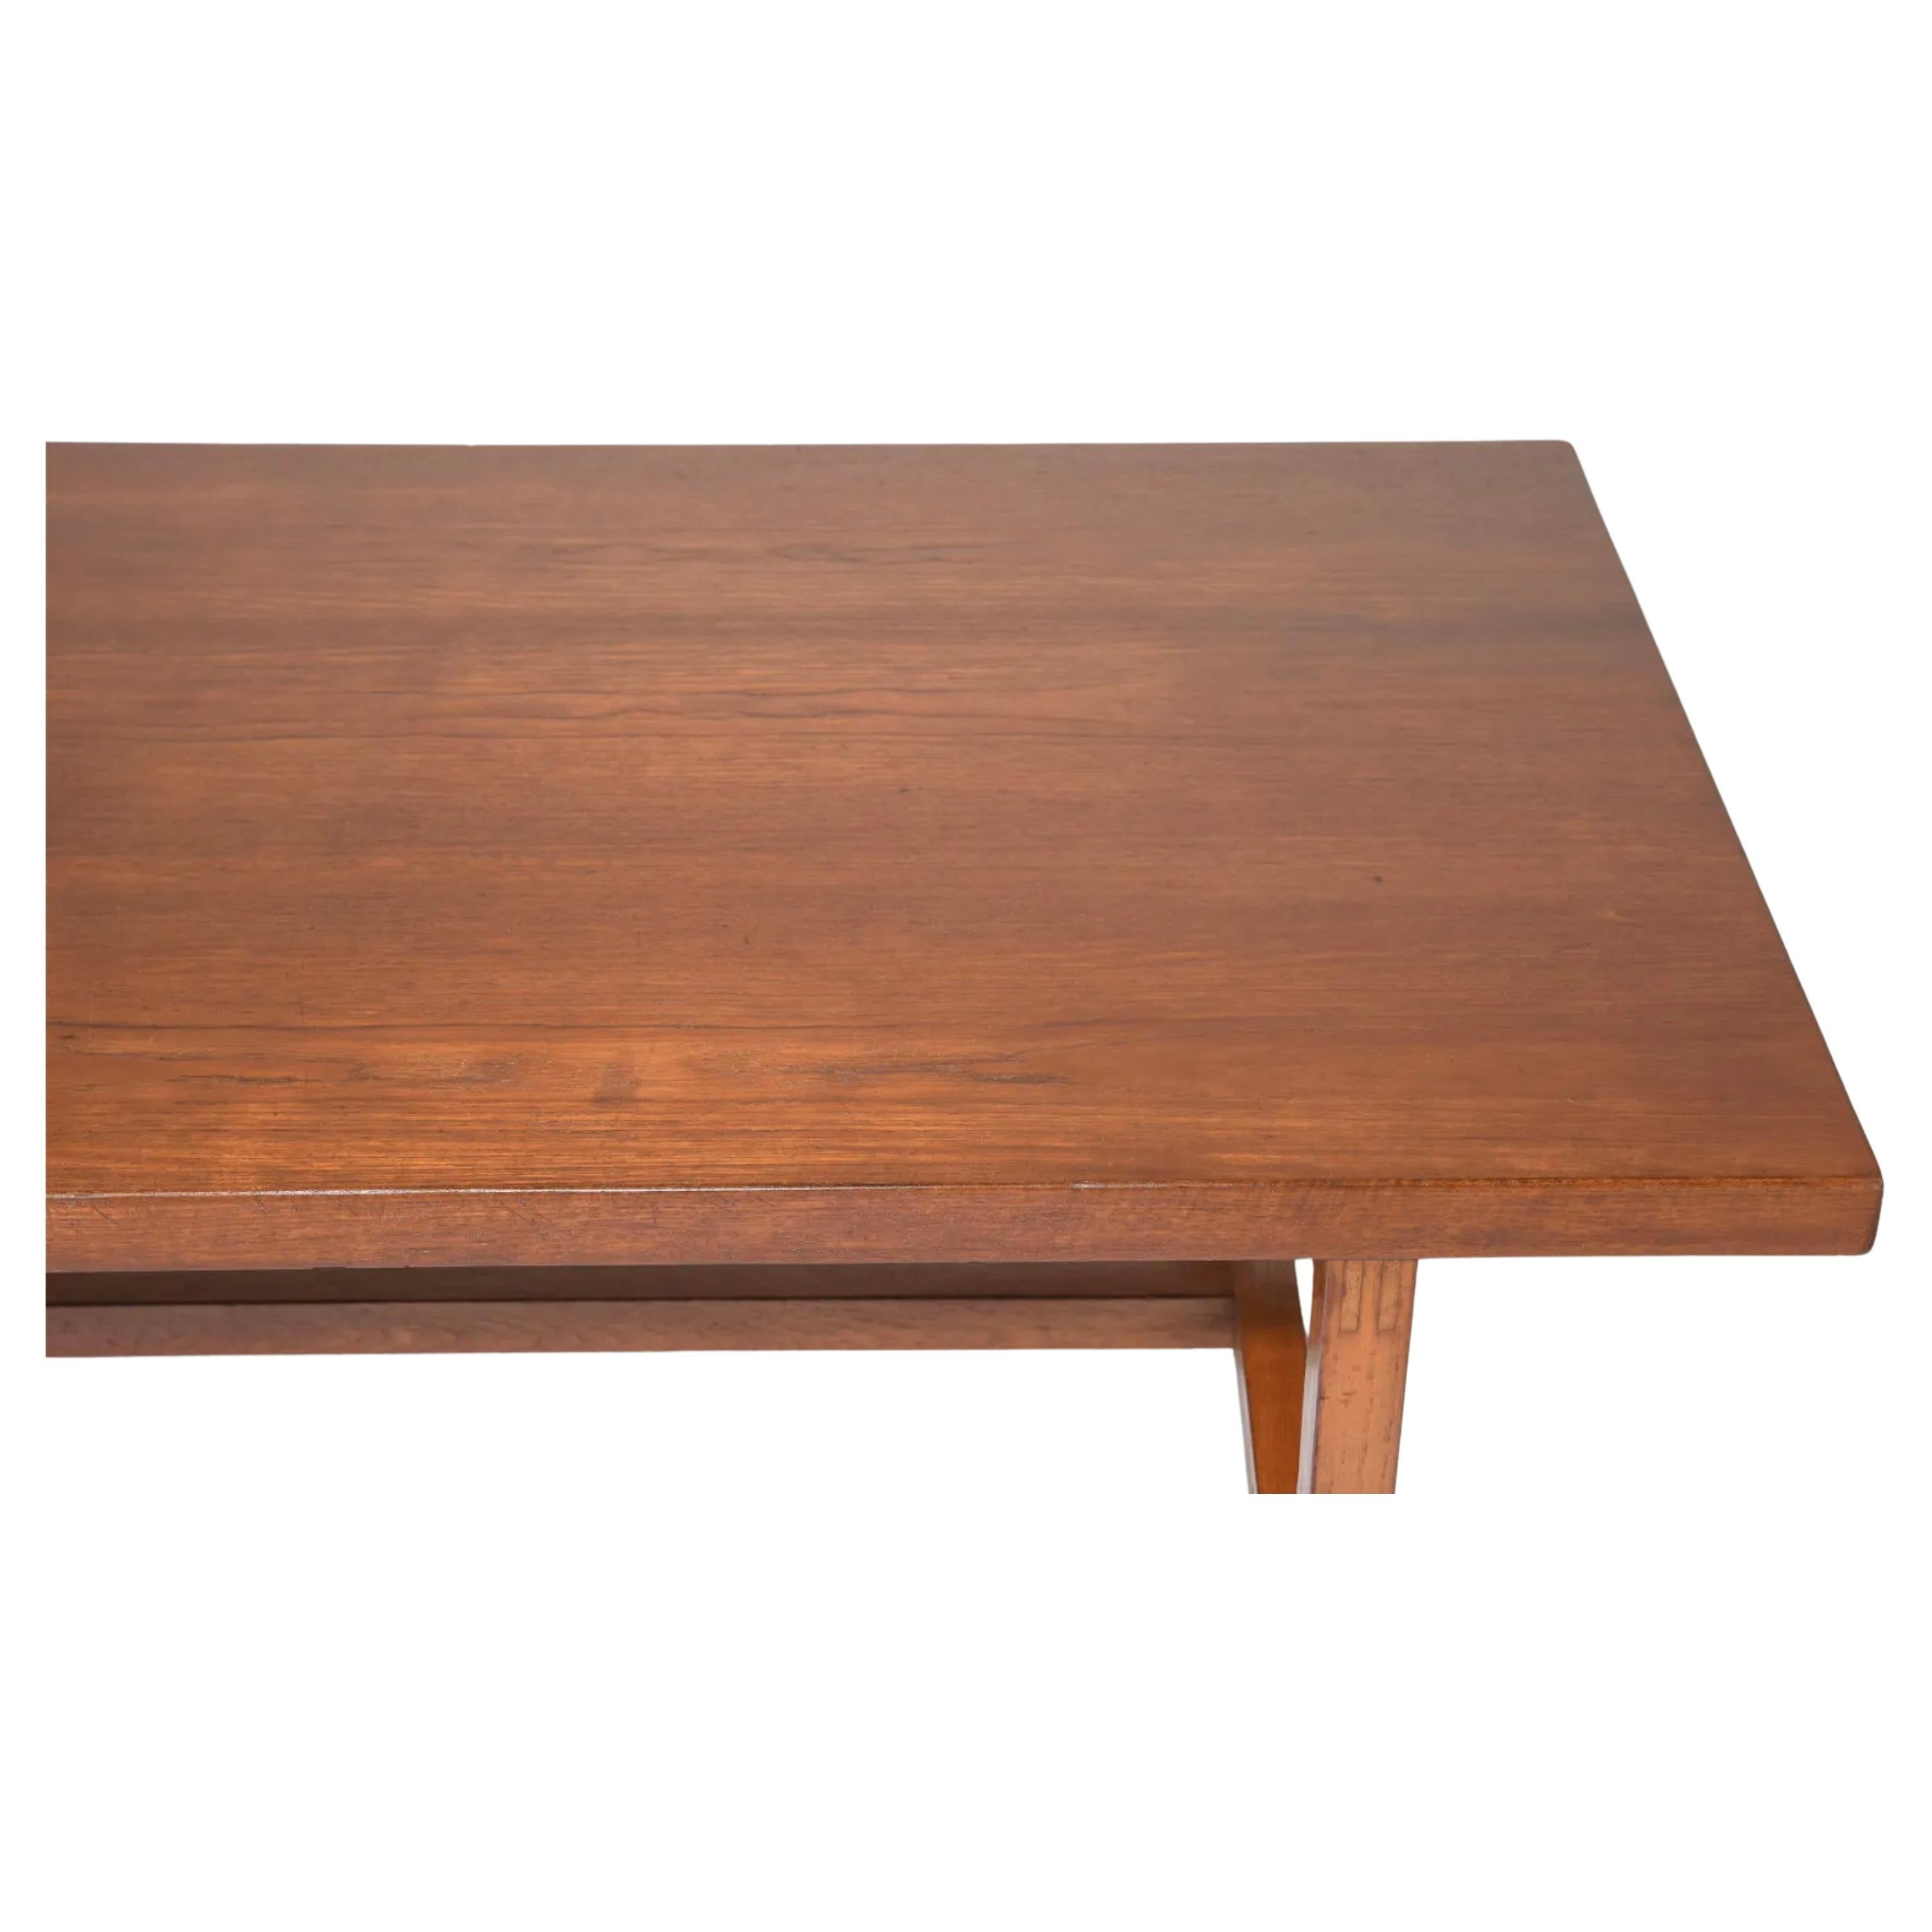 Danish Modern Teak Rectangle dining Table made in Denmark. Shows normal use and wear - table ready for use. Nice wood joints. No leaves or extensions just a solid table. Seats 4-6 chairs. Made in Denmark. Located in Brooklyn NYC.

Table measures 72”